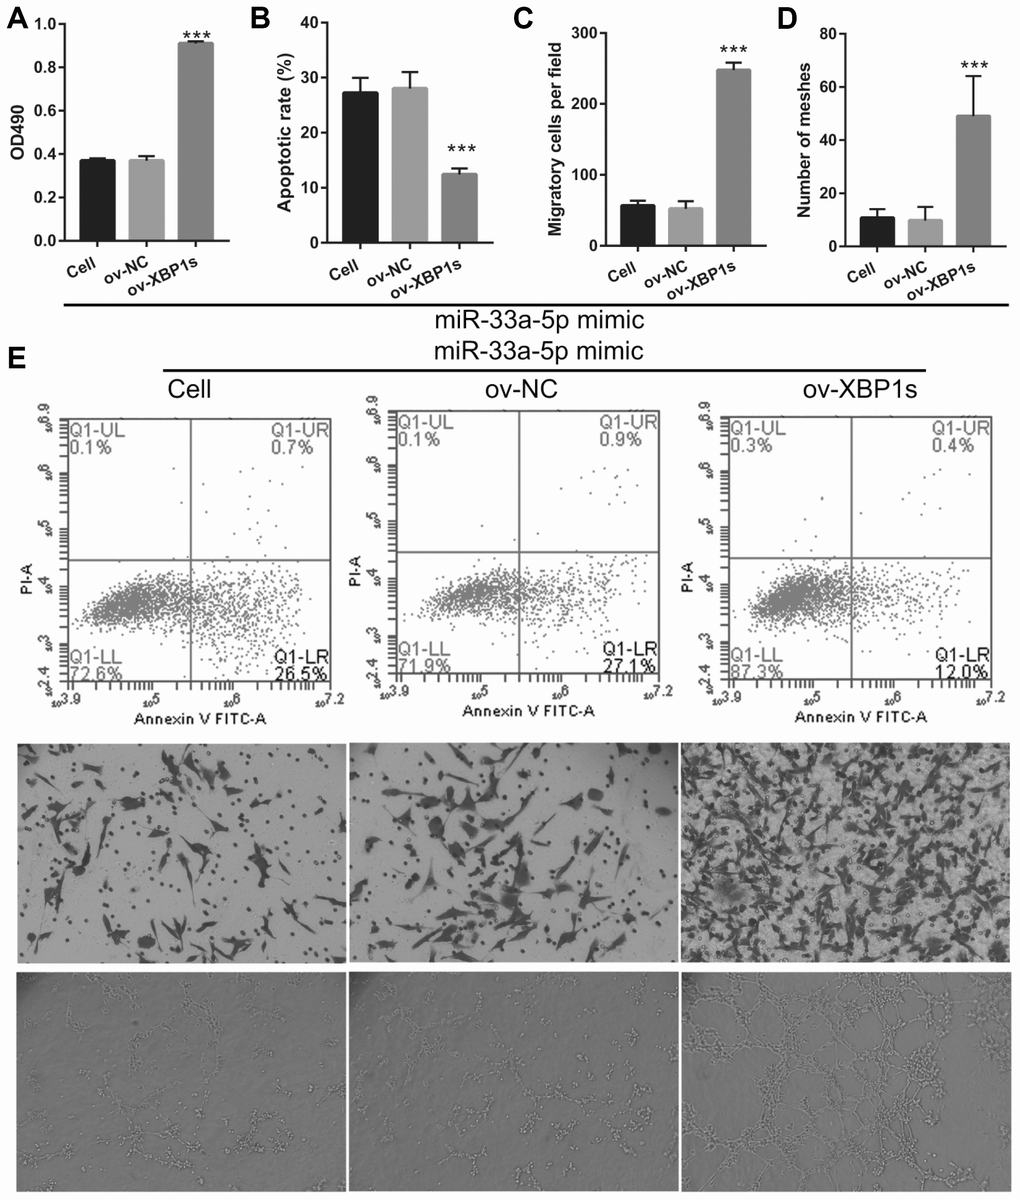 XBP1s overexpression reversed the effect of miR-33a-5p on the proliferation and angiogenesis in OGD-treated BMECs. (A) Proliferation was measured by MTS after co-transfection with miR-33a-5p mimic and XBP1s-pcDNA3.1 at 48 h, followed by OGD treatment for 4 h. (B–D) The bar represents the apoptotic rate (B), migratory cells (C), and number of meshes (D). (E) A representative image of apoptosis, migration (scale bar: 200×), and angiogenesis (scale bar: 200×), measured by flow cytometry, trans-well, and tube formation assay, respectively, after co-transfection with miR-33a-5p mimic and XBP1s-pcDNA3.1 at 48 h, followed by OGD treatment for 4 h. ***P